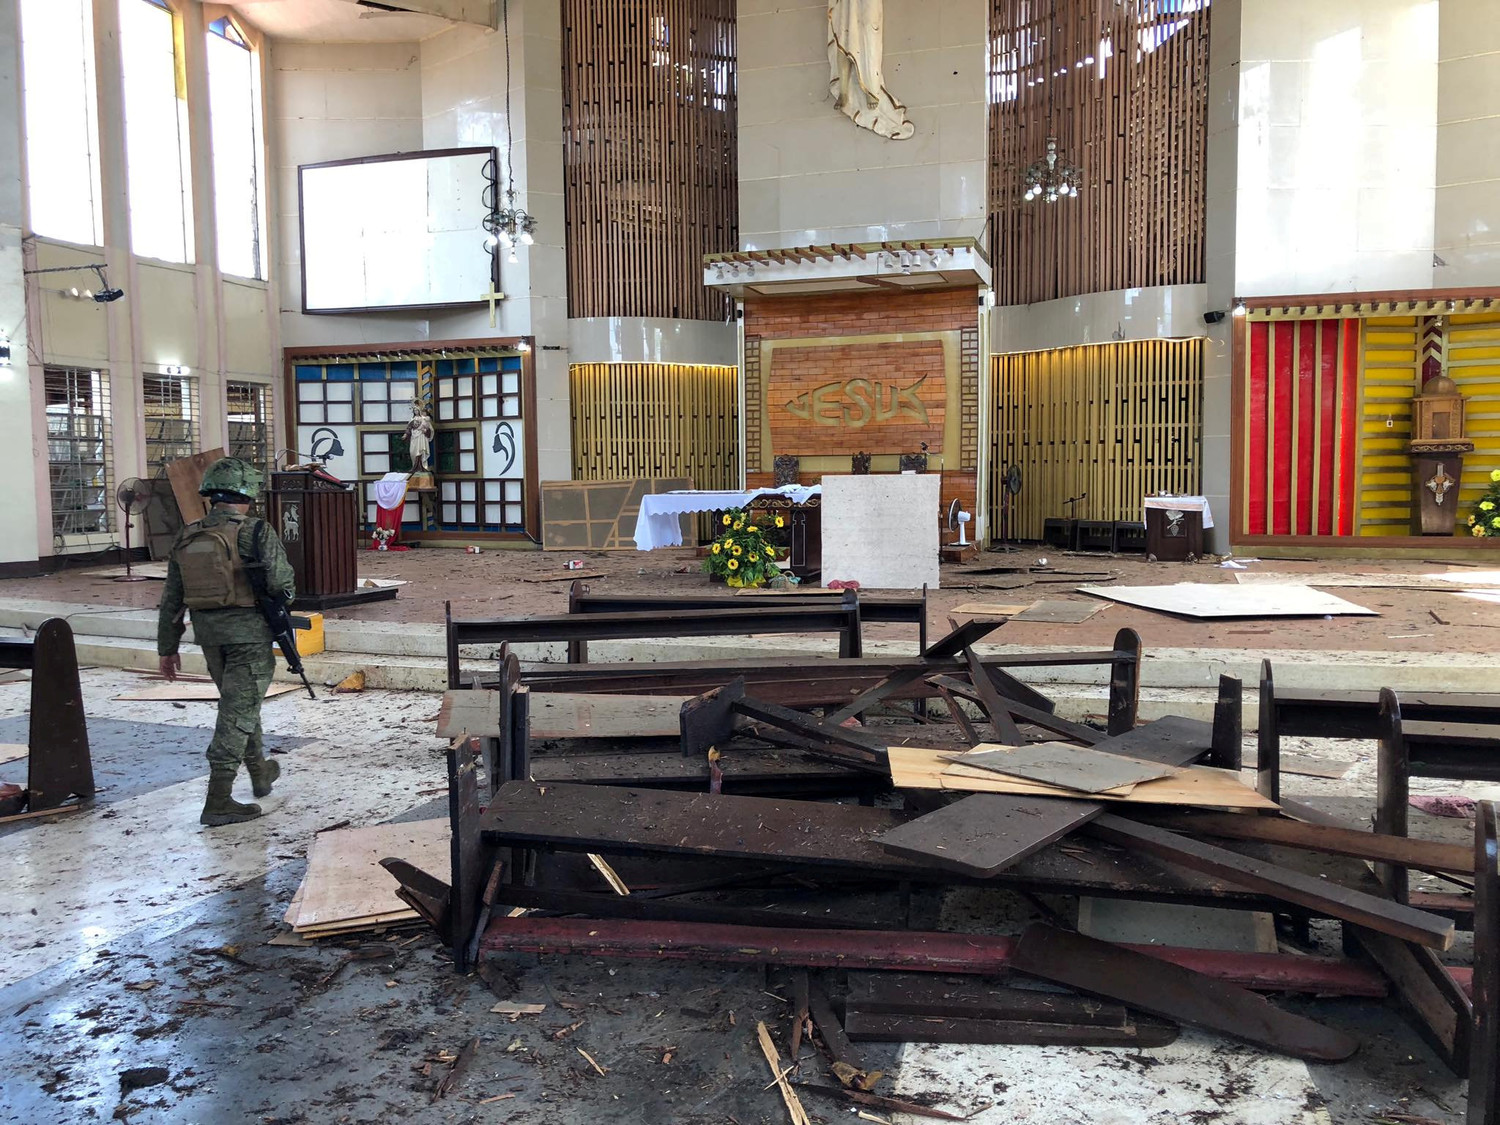 A Philippine army member inspects damage inside the Cathedral of Our Lady of Mount Carmel following a bomb blast in Jolo Jan. 27, 2019. The explosion, just before morning Mass, killed at least 20 people and wounded dozens of others.